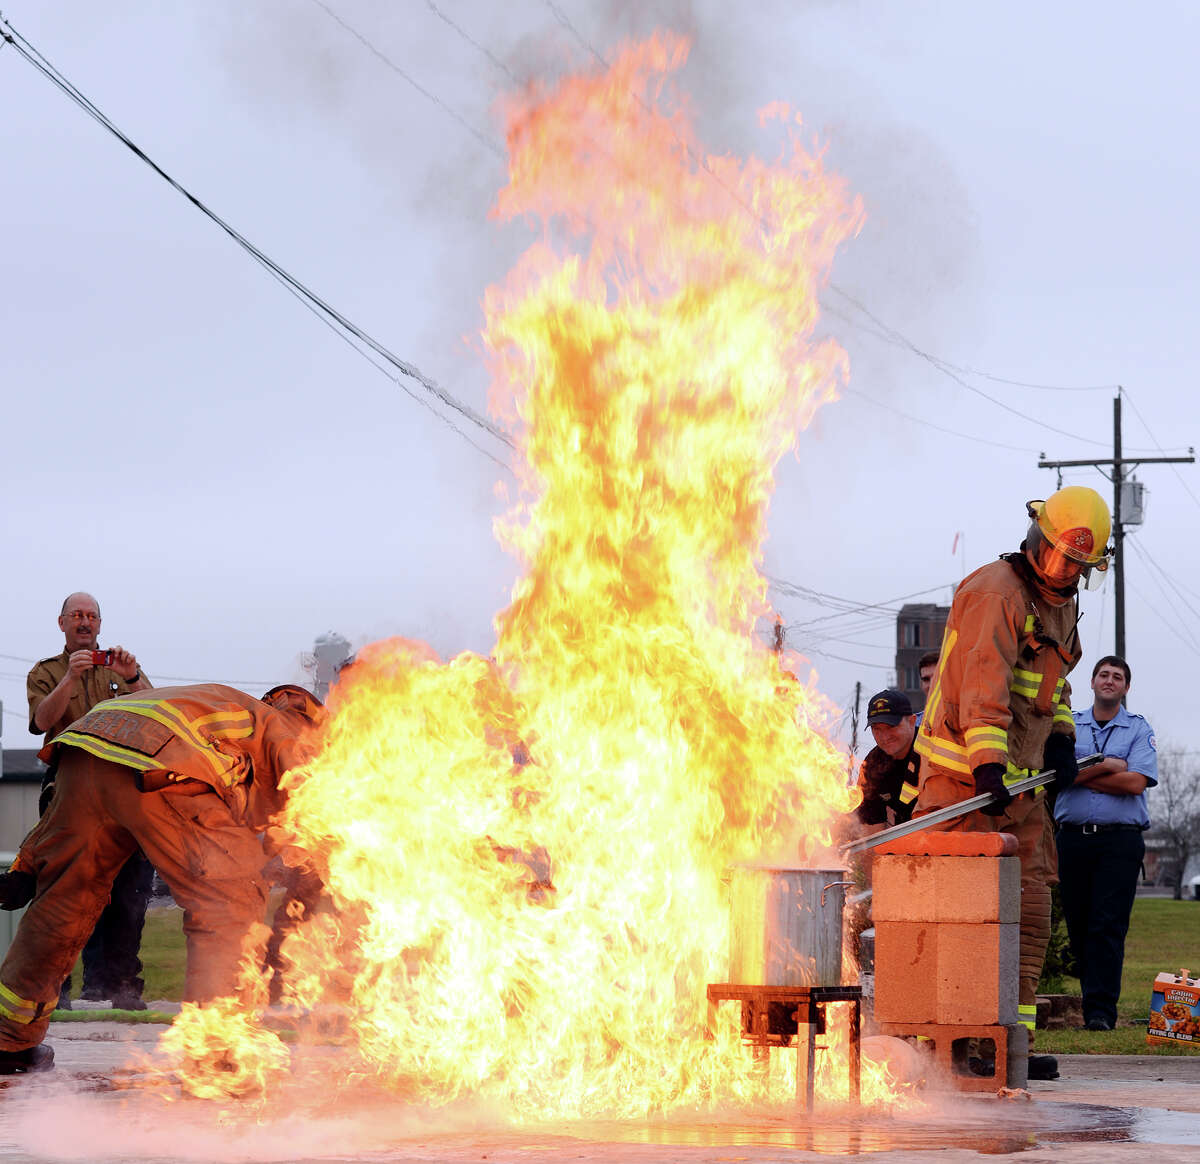 Fireman Matt Kiser, left, steps in to turn off the propane tank while Andy Brown drops a frozen turkey into an overfilled pot of oil as it spills over and catches fire Friday morning. The Beaumont Fire Department demonstrated the dangers of improperly frying a turkey at their training facility Friday morning. Texas is ranked number one in the nation for turkey frying incidents. Photo taken Jake Daniels/@JakeD_in_SETX